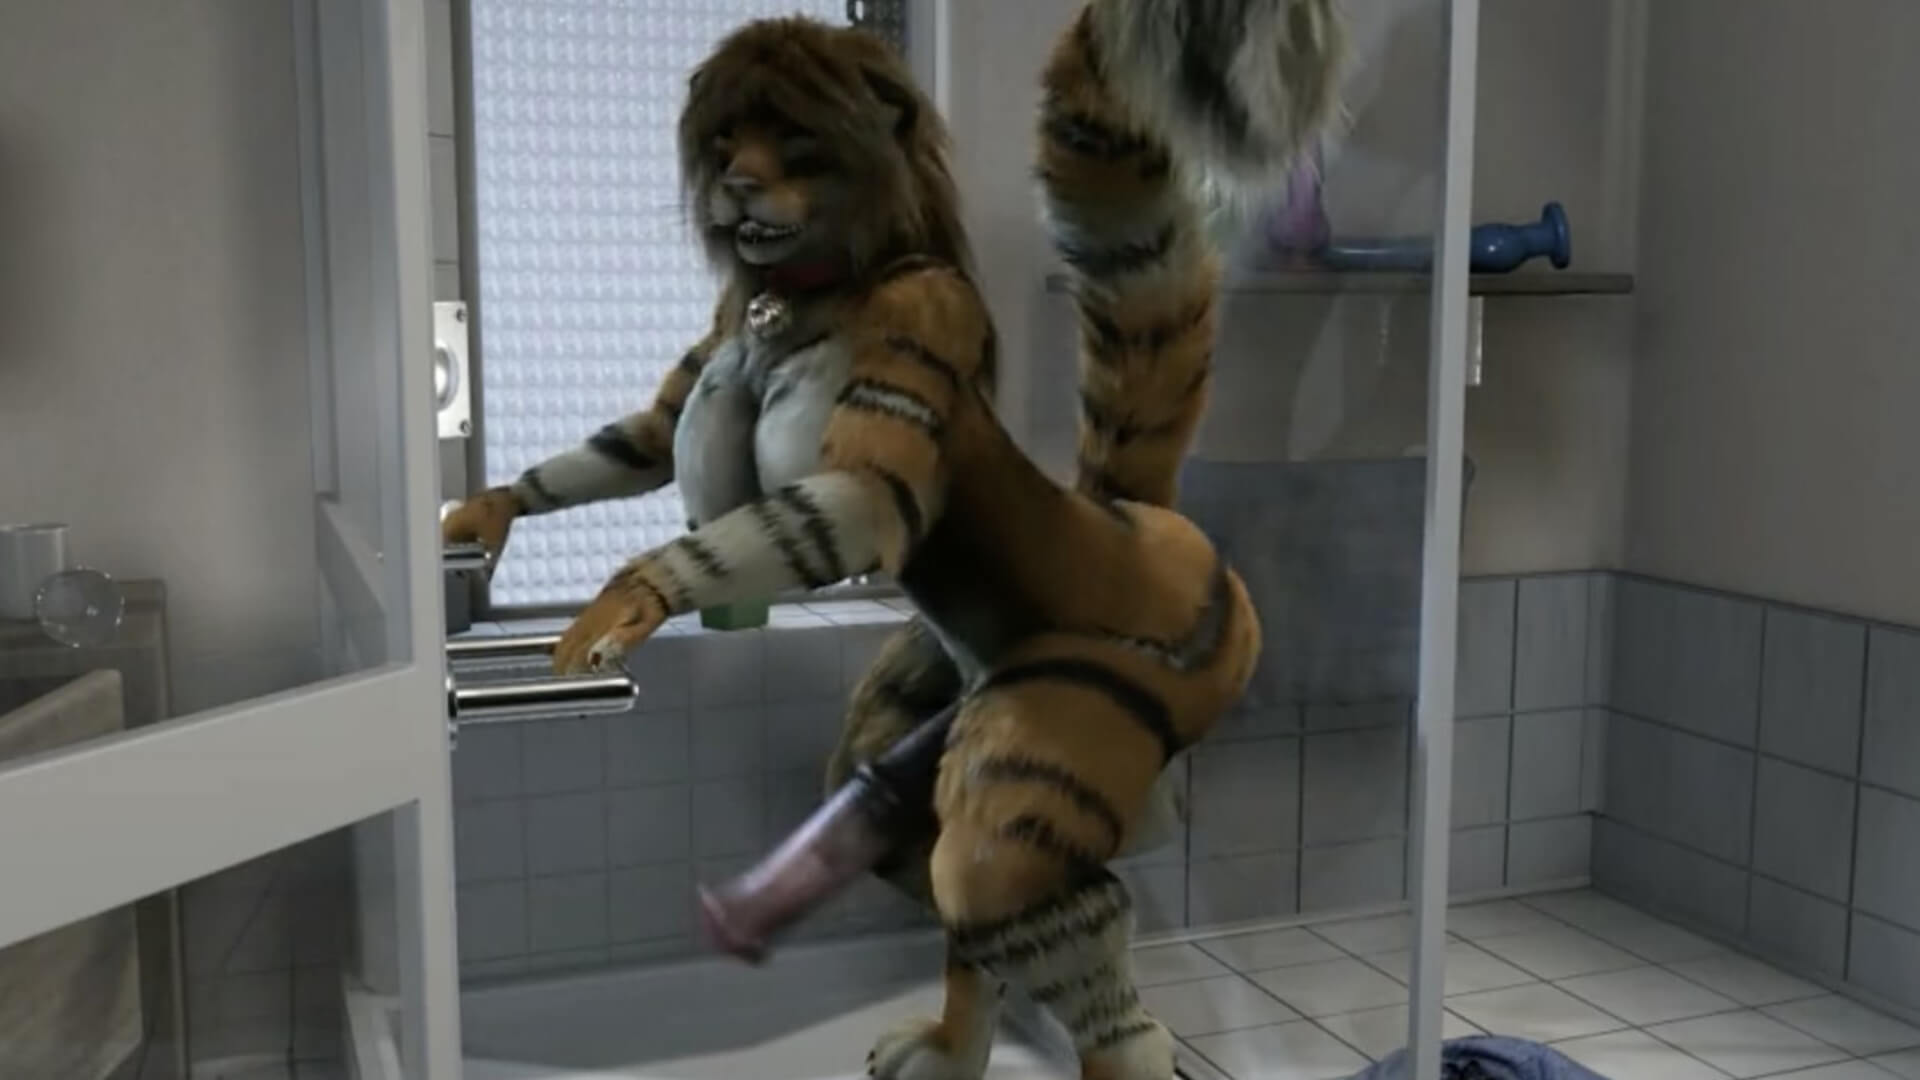 Furry Porn Games: Charactered Animal Sex - JerkDolls